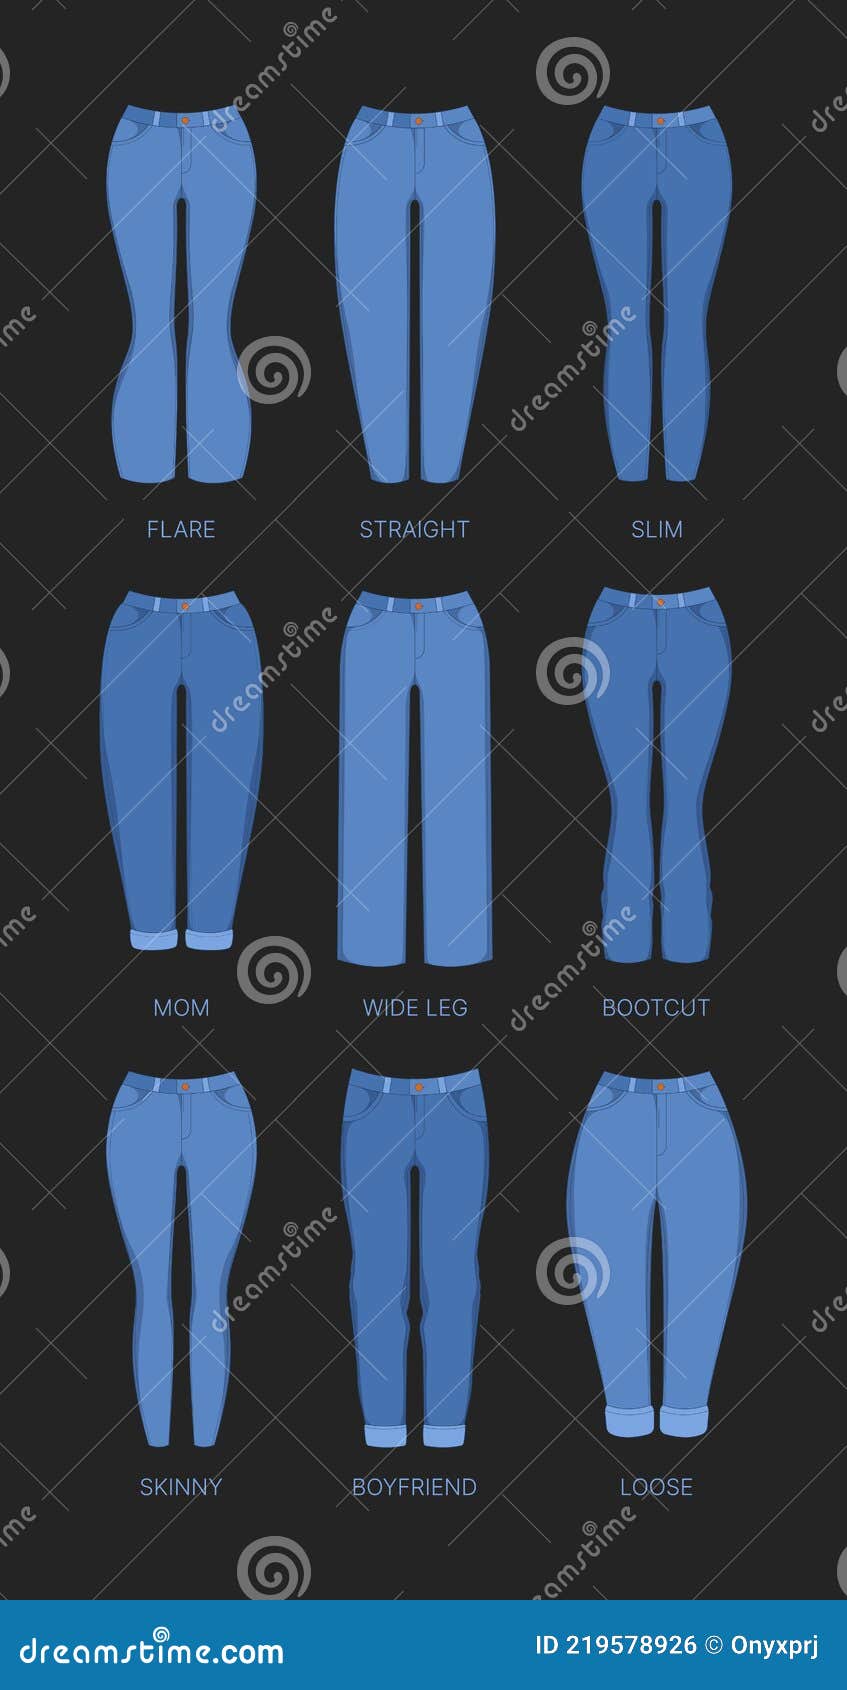 https://thumbs.dreamstime.com/z/denim-woman-clothes-skinny-pants-girls-various-types-textile-jeans-garish-vector-flat-illustration-collection-girl-flare-219578926.jpg